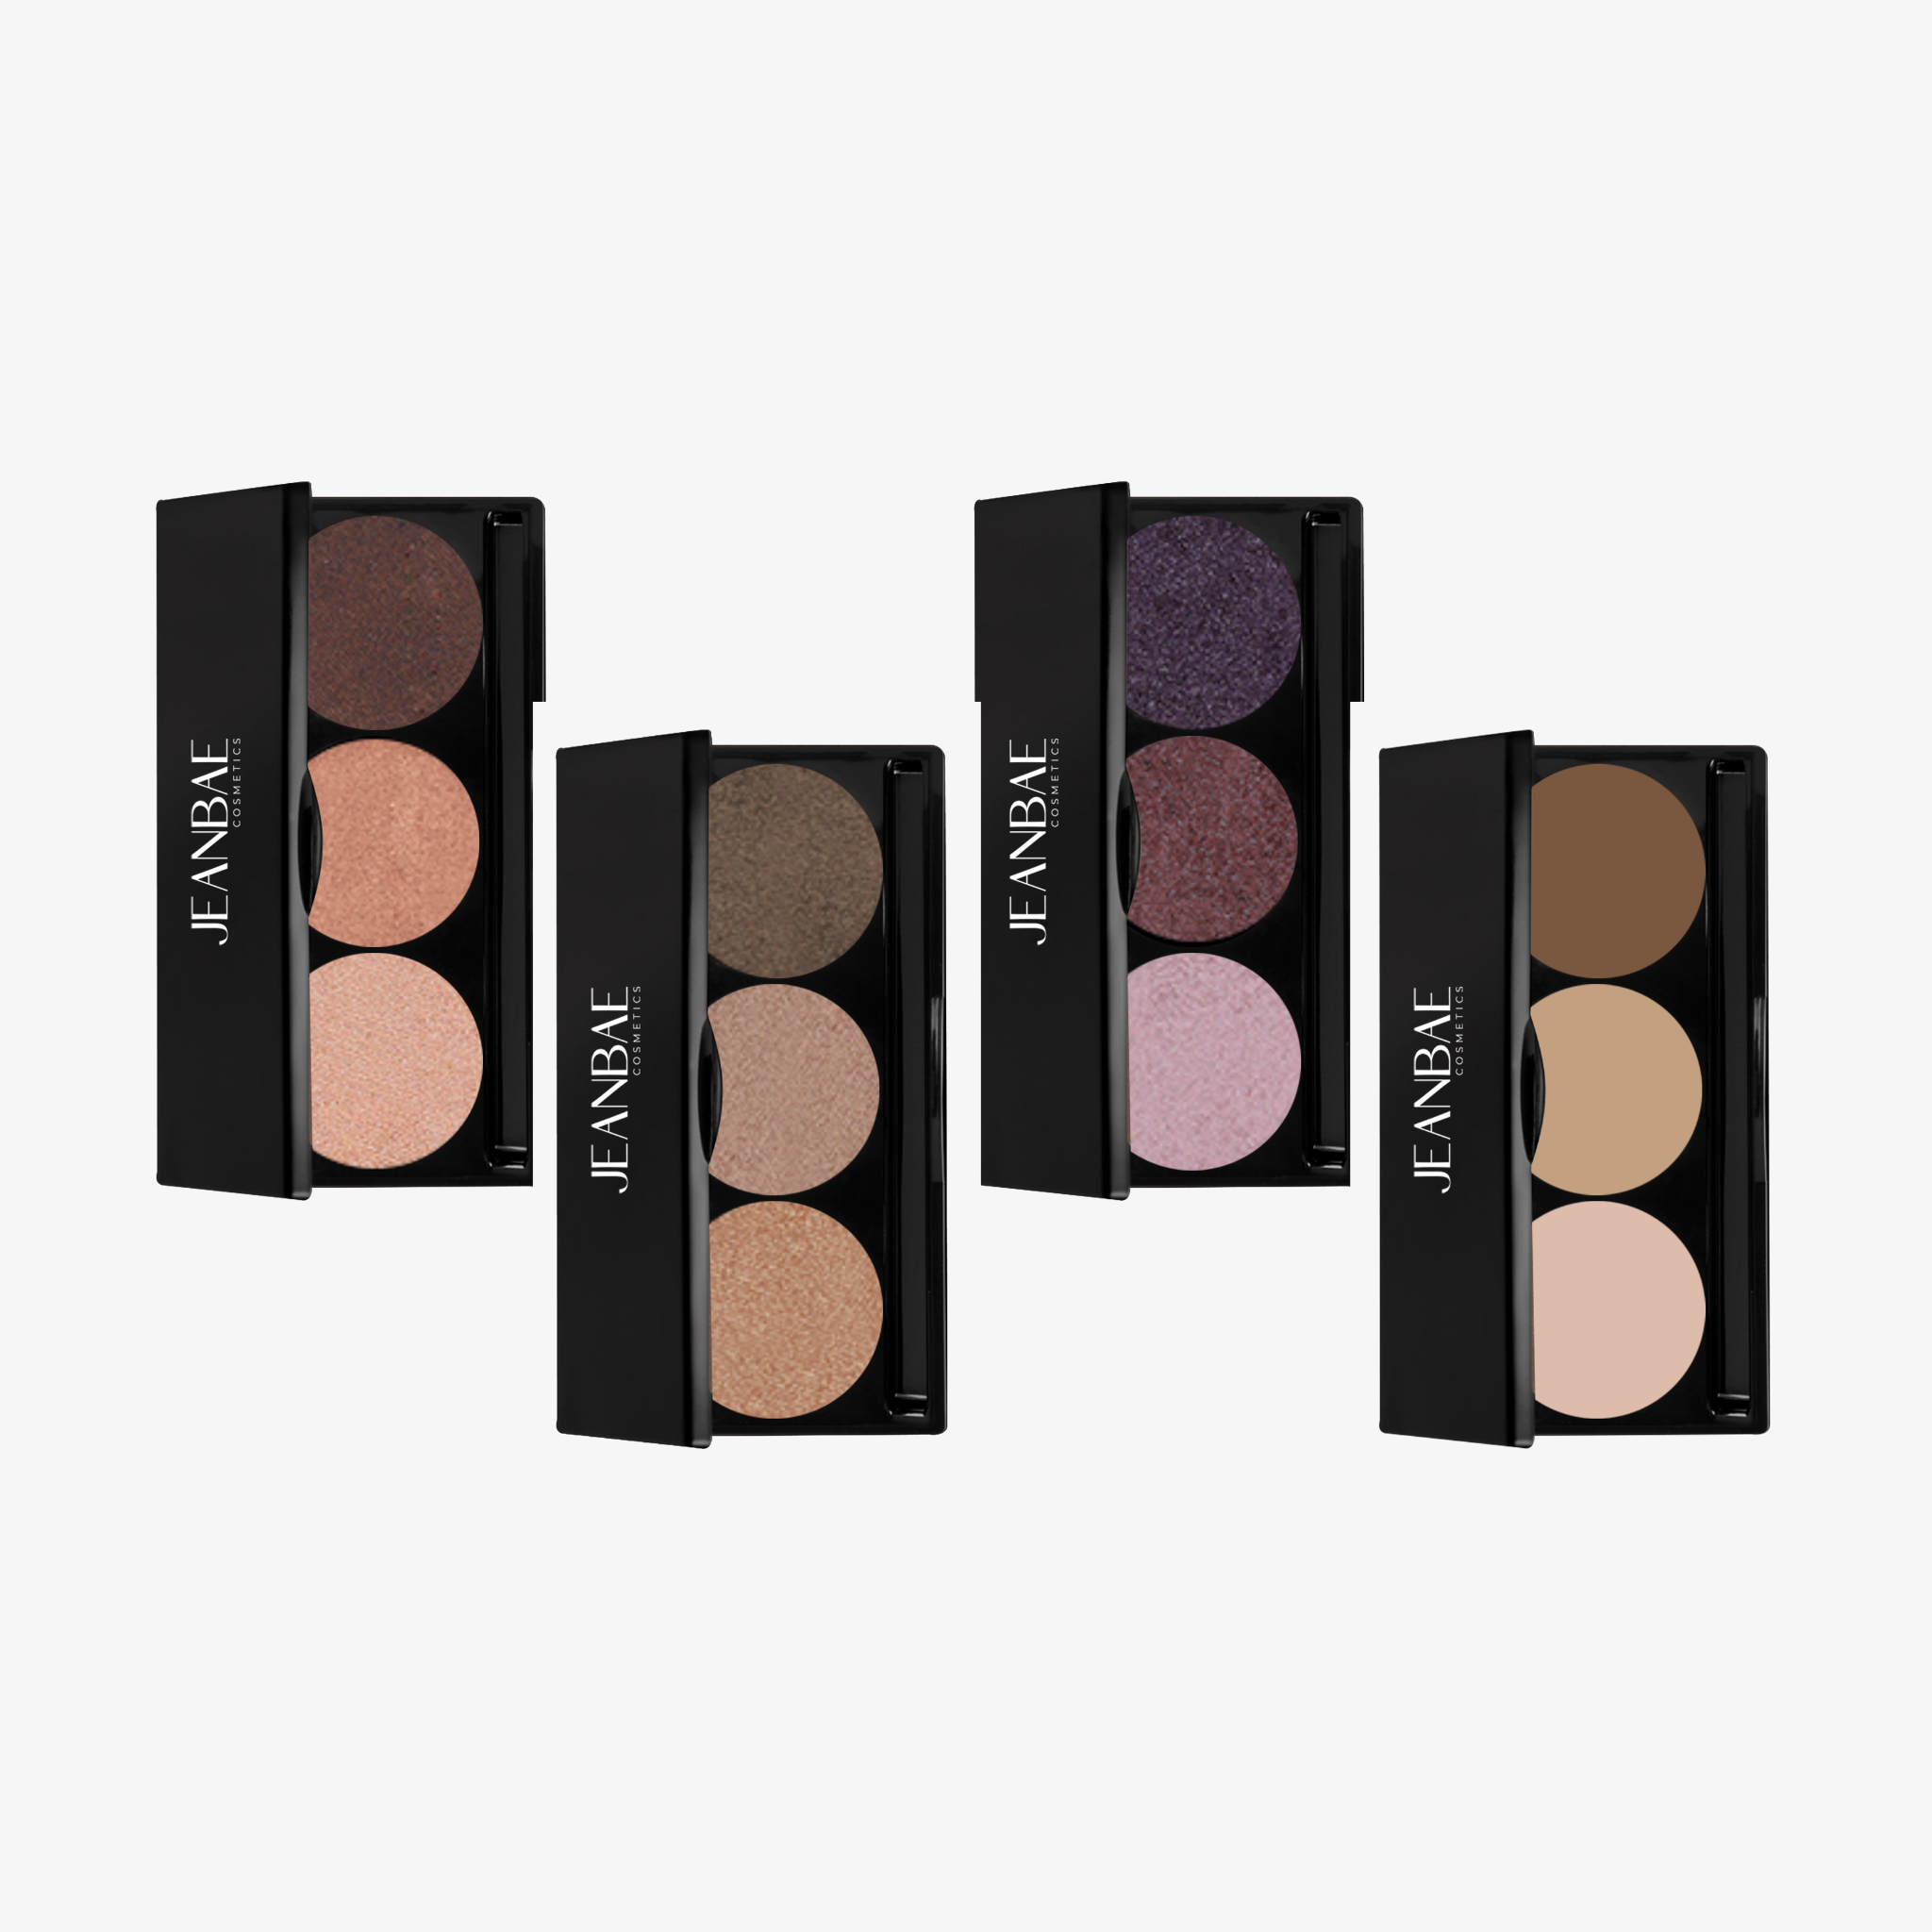 Triple-milled eyeshadow palettes with trio signature shades in matte, metallic, pearlized, and shimmer finishes.THIS PRODUCT IS Cruelty Free, Hypoallergenic, Non-Comedogenic, Halal Certified, and EU Compliant. Free of Parabens and Fragrances.